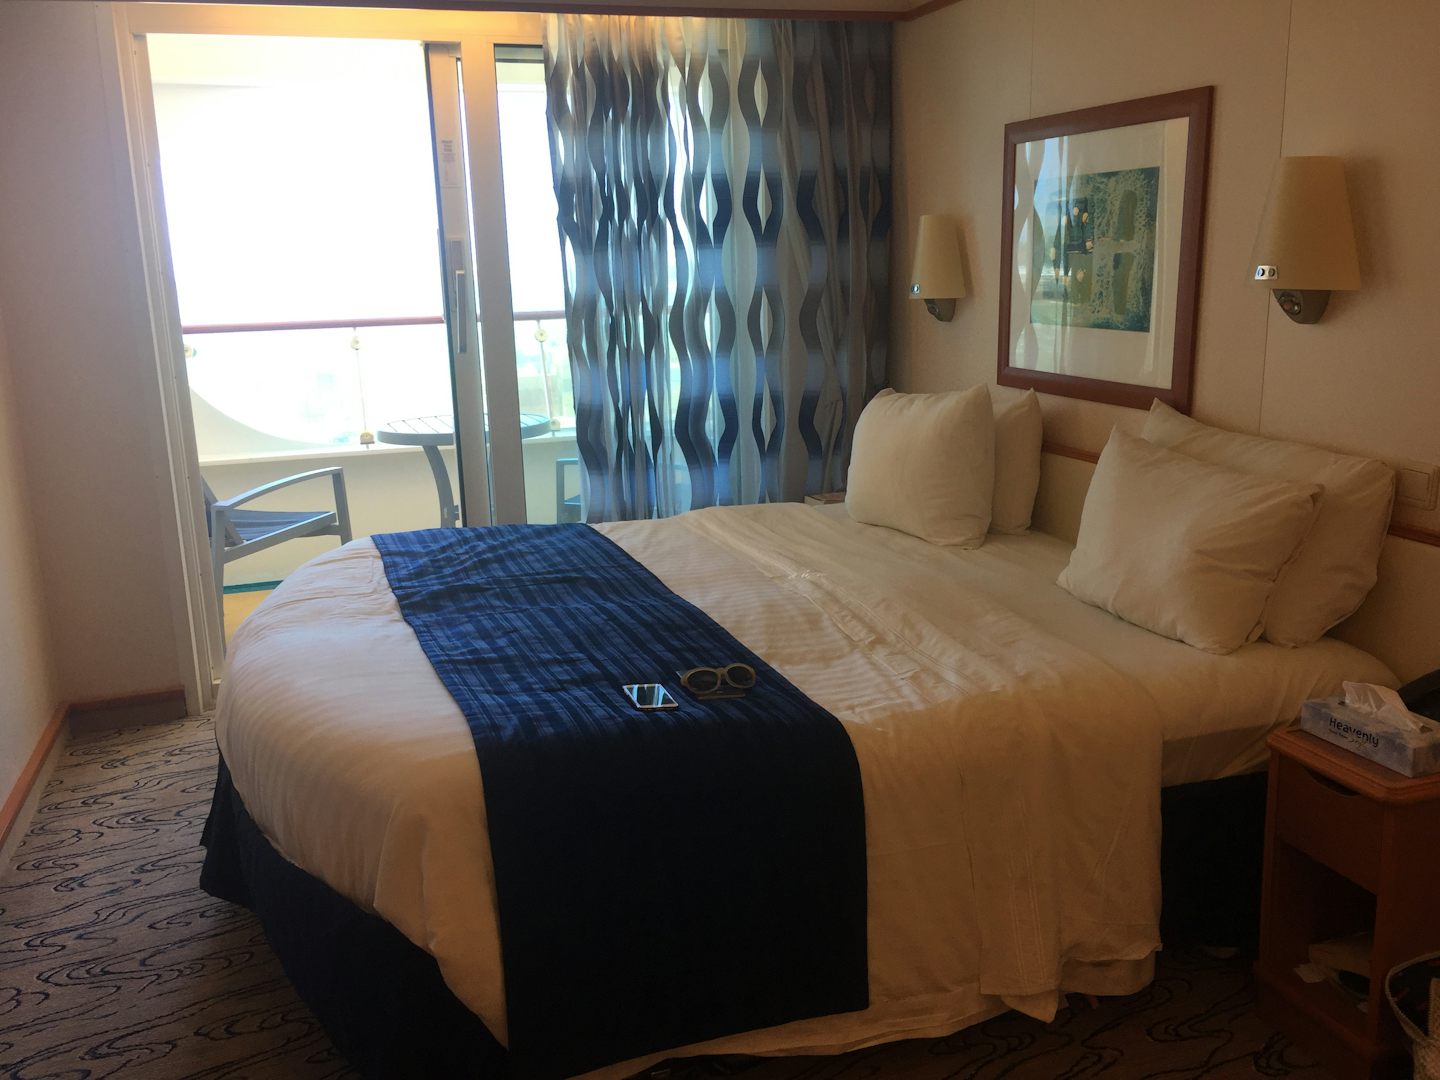 Stateroom with outside balcony.